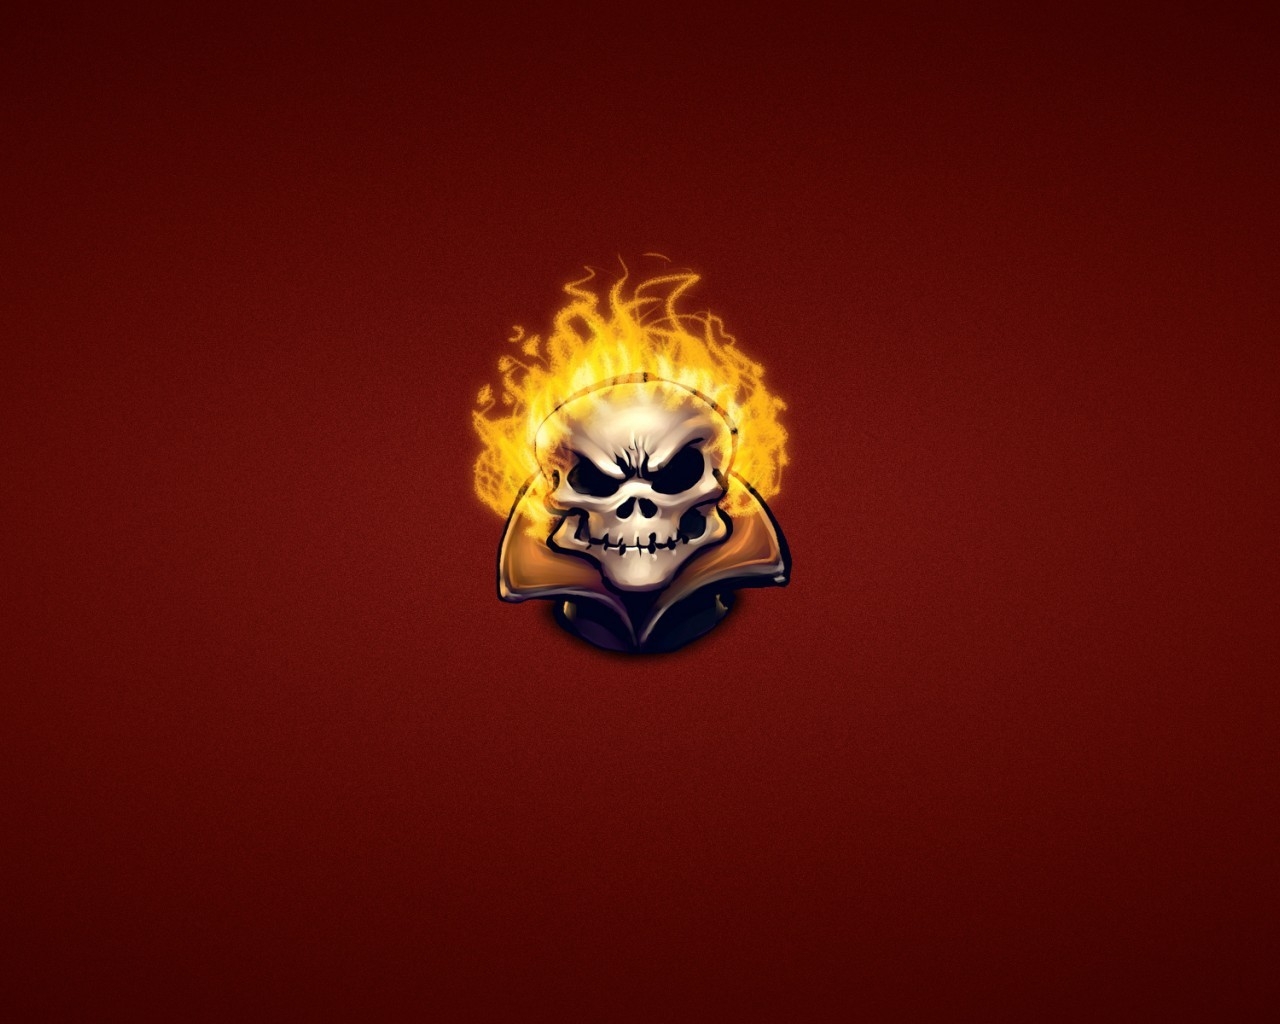 Ghost Rider Skeleton for 1280 x 1024 resolution